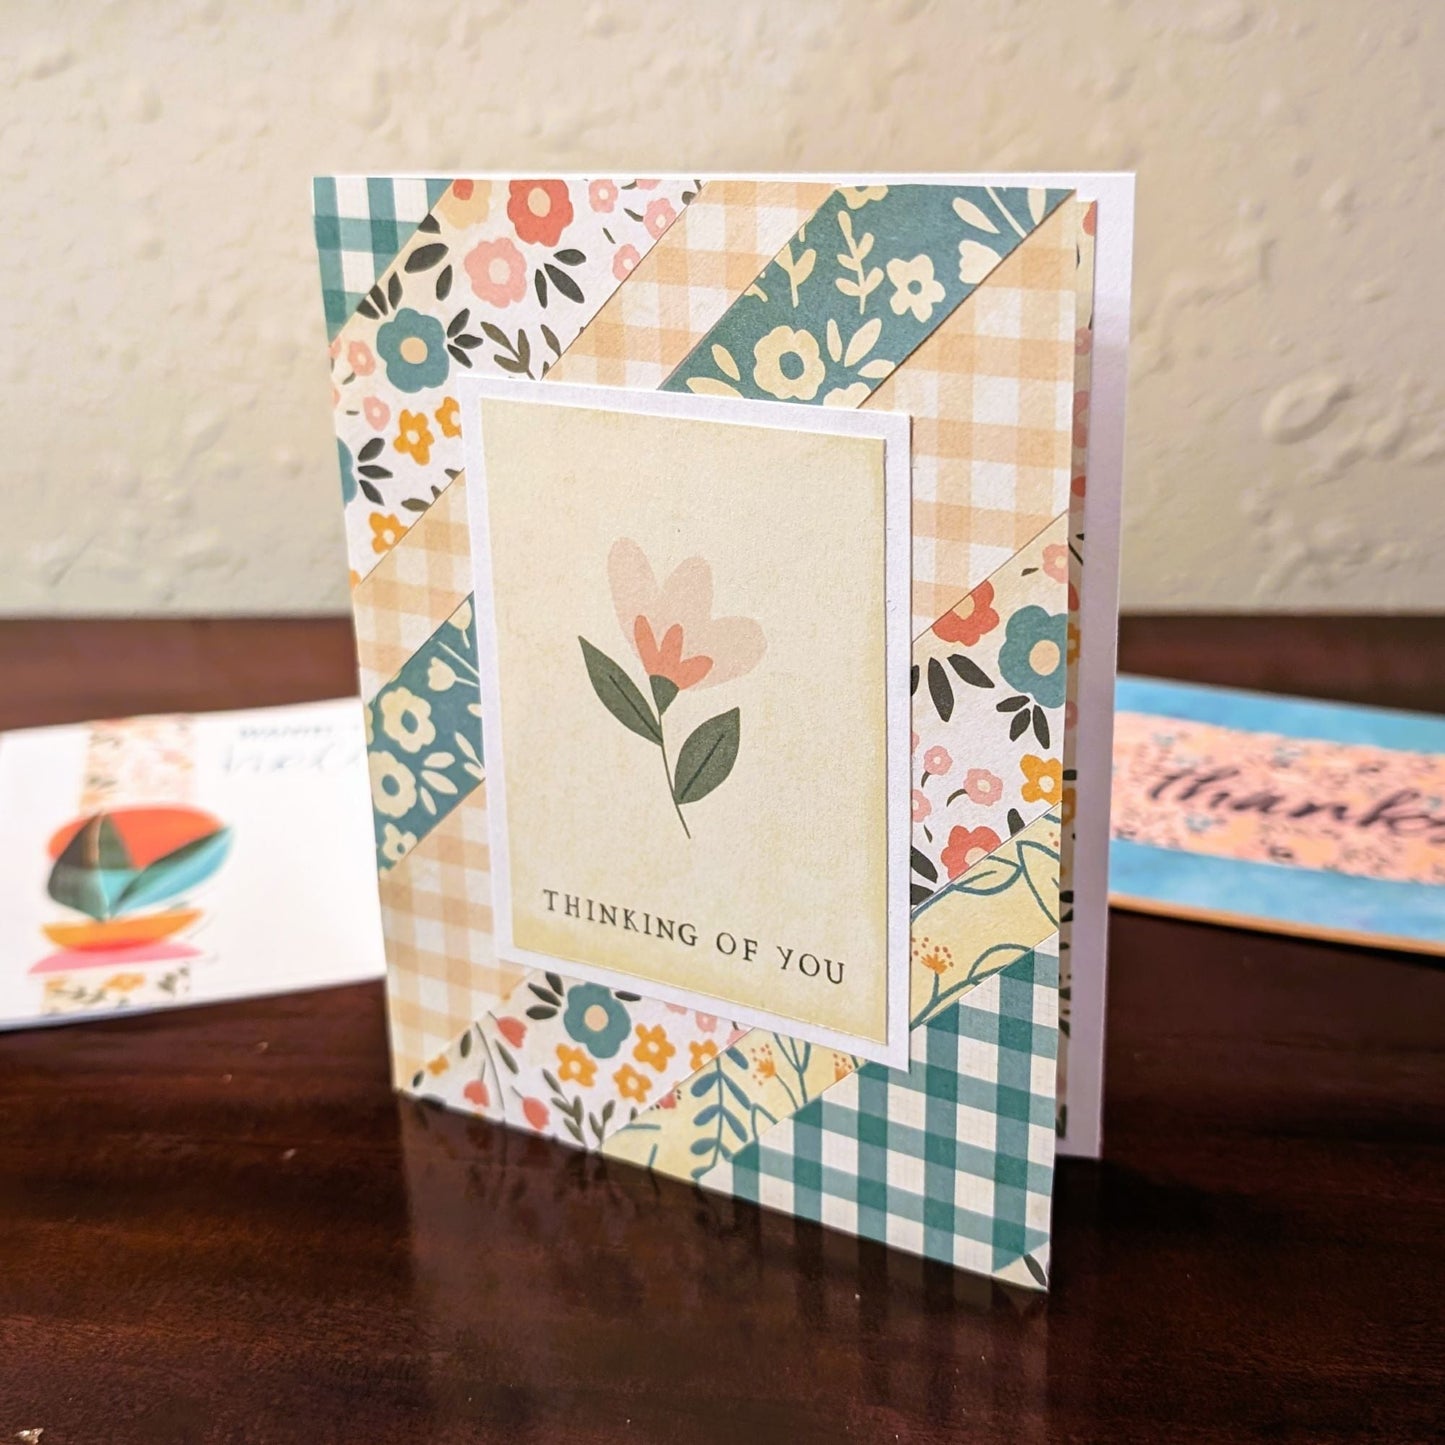 Rustic Florals, Thinking of You - Say Hello & Thank You - Handmade Greeting Card - 31 Rubies Designs